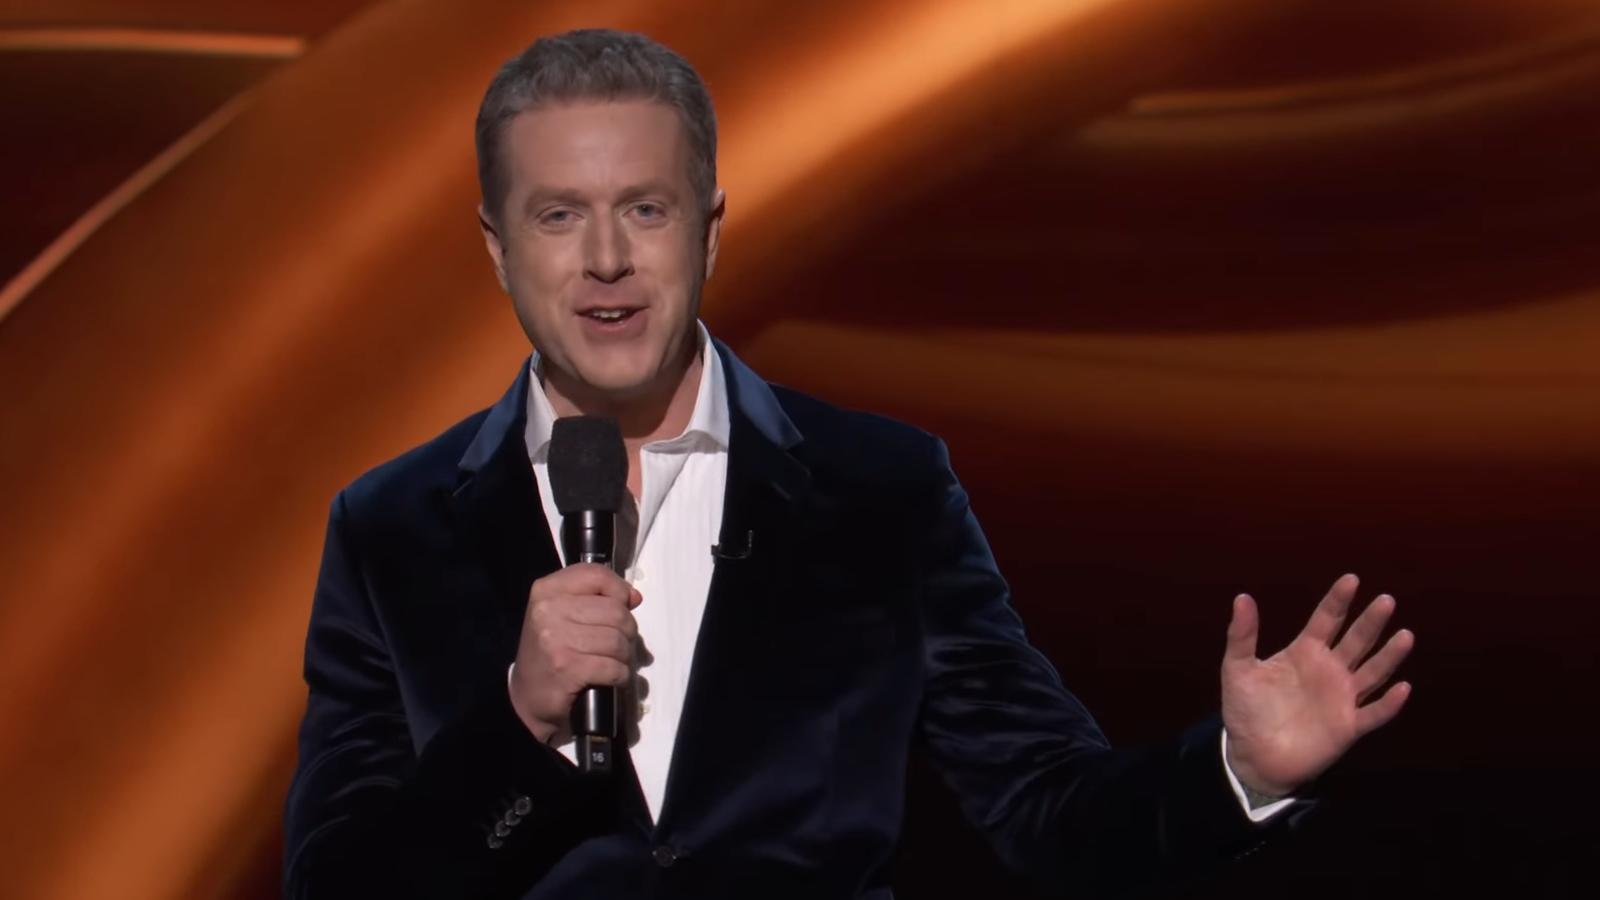 geoff keighley presenting the game awards 2022.